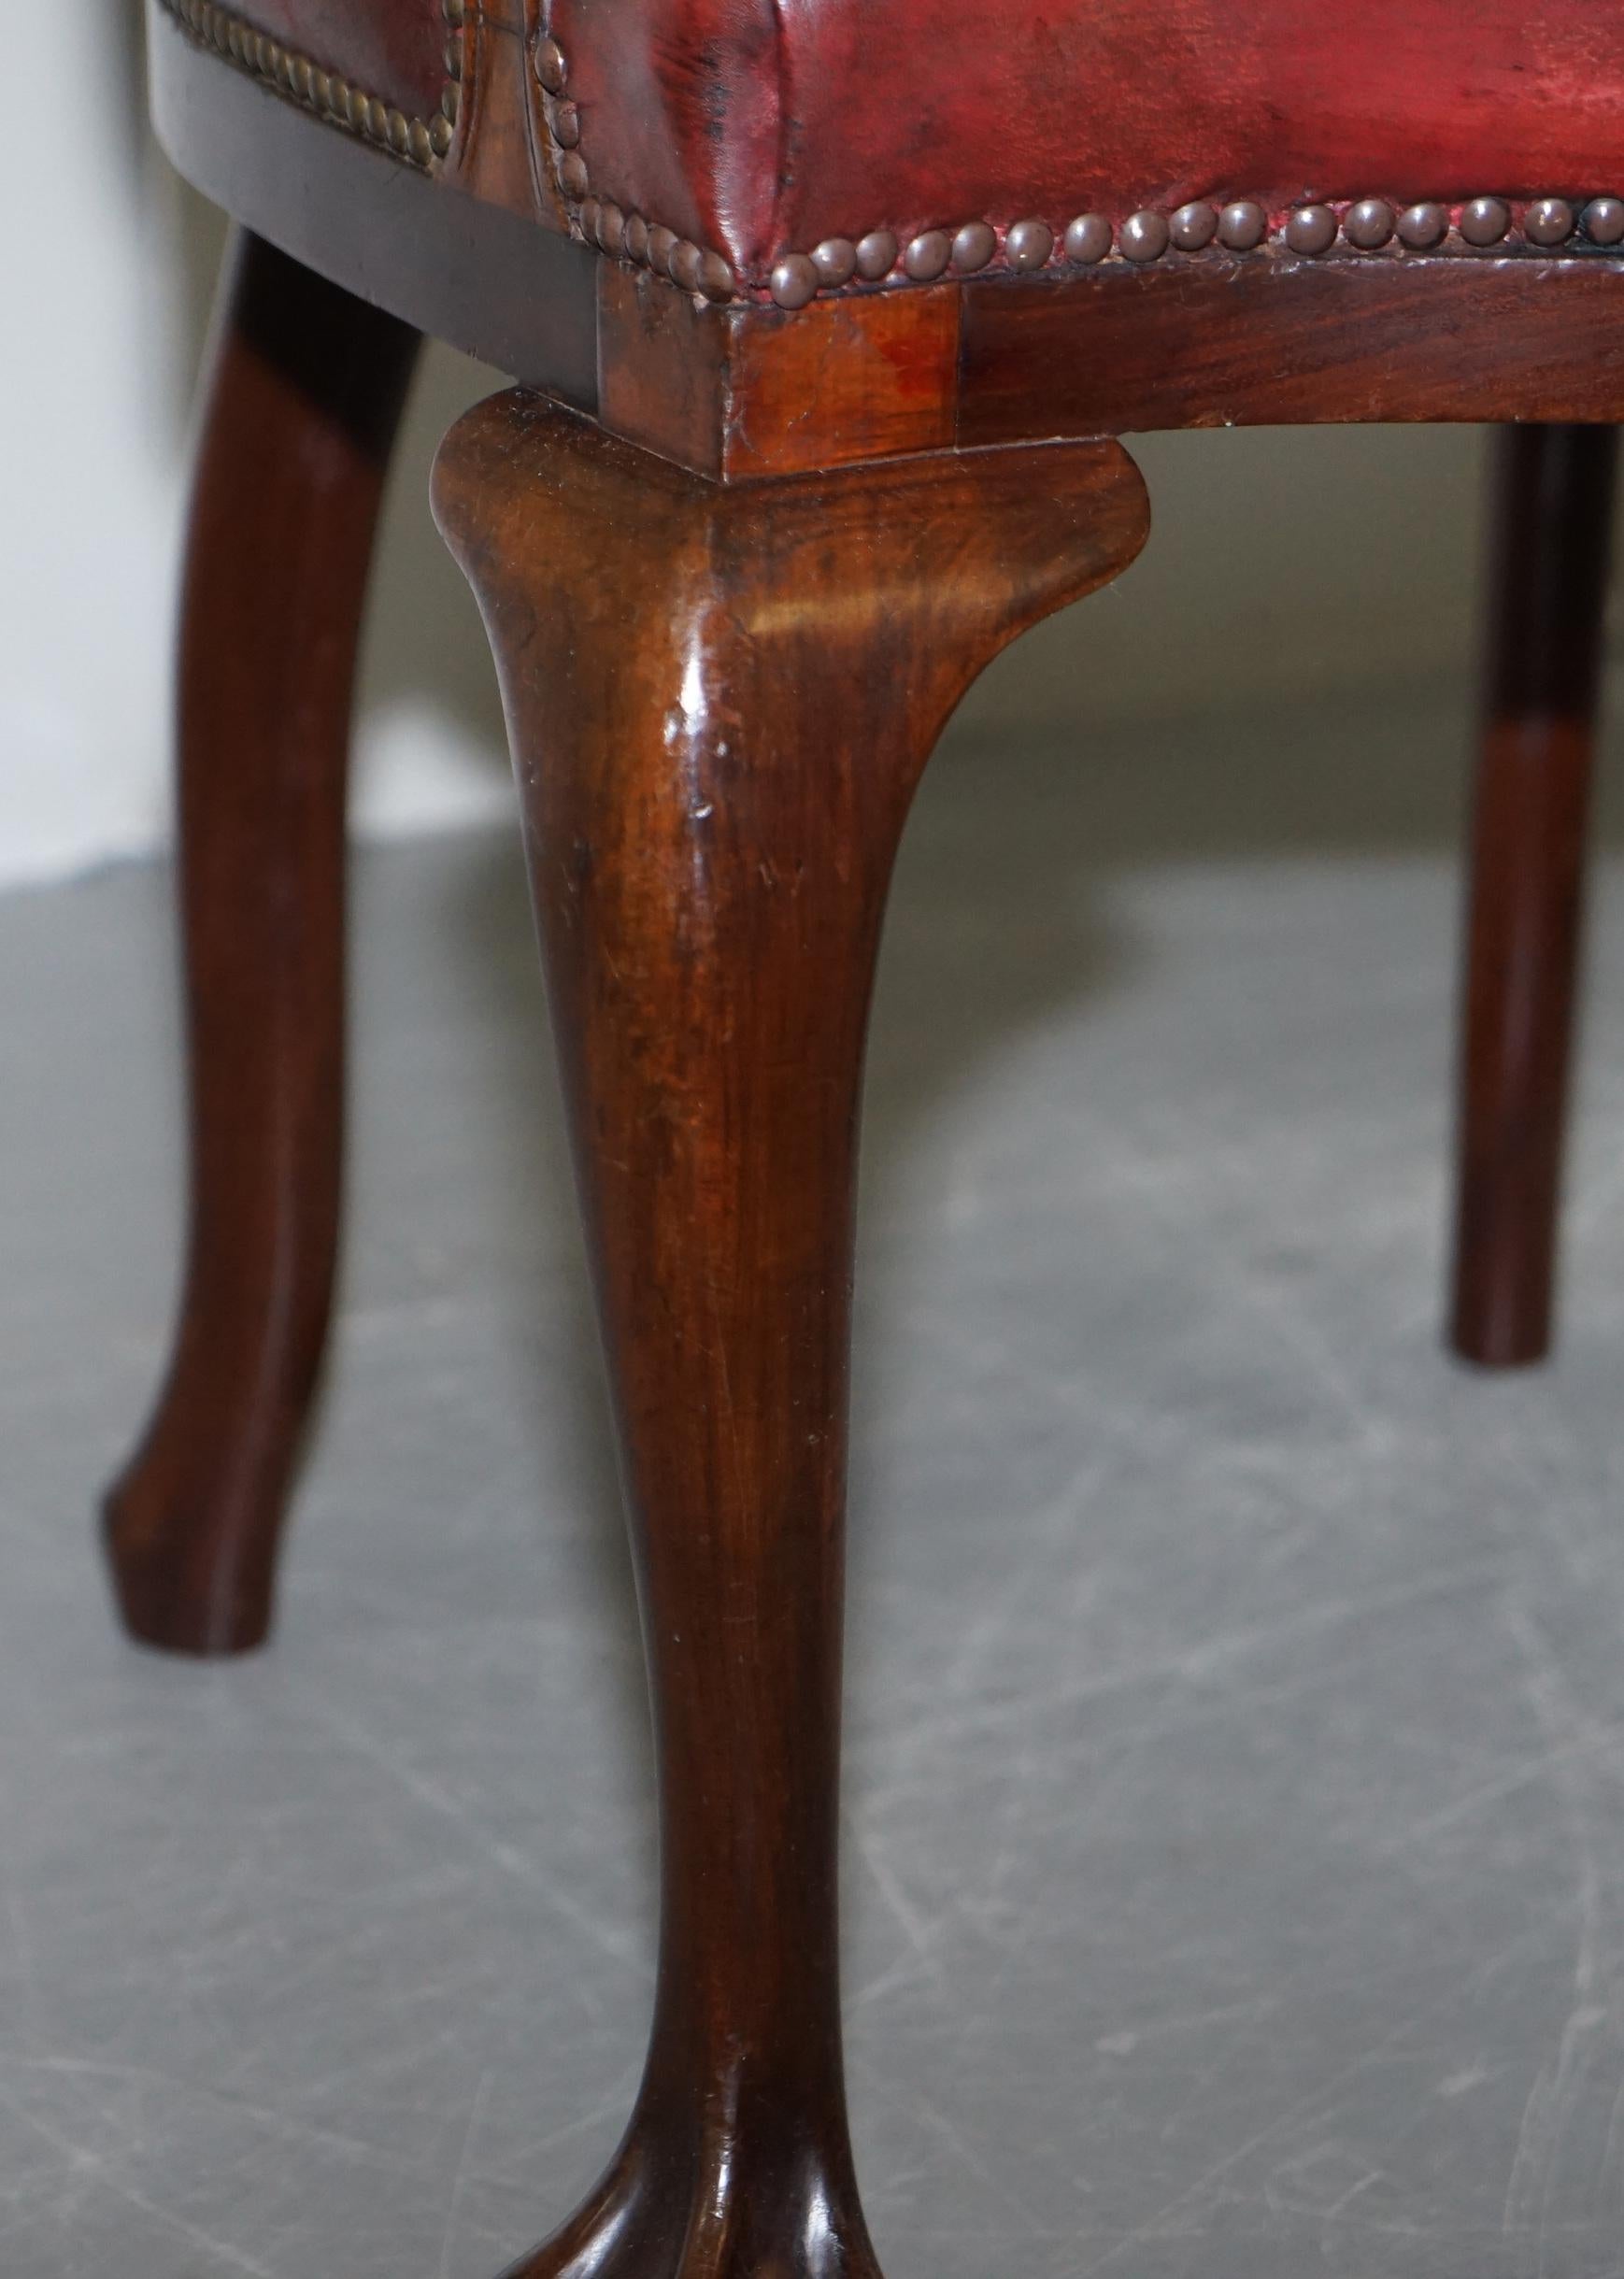 Hand-Crafted Claw & Ball Cabriolet Leg Oxblood Leather Small Chair or Stool Office or Desk